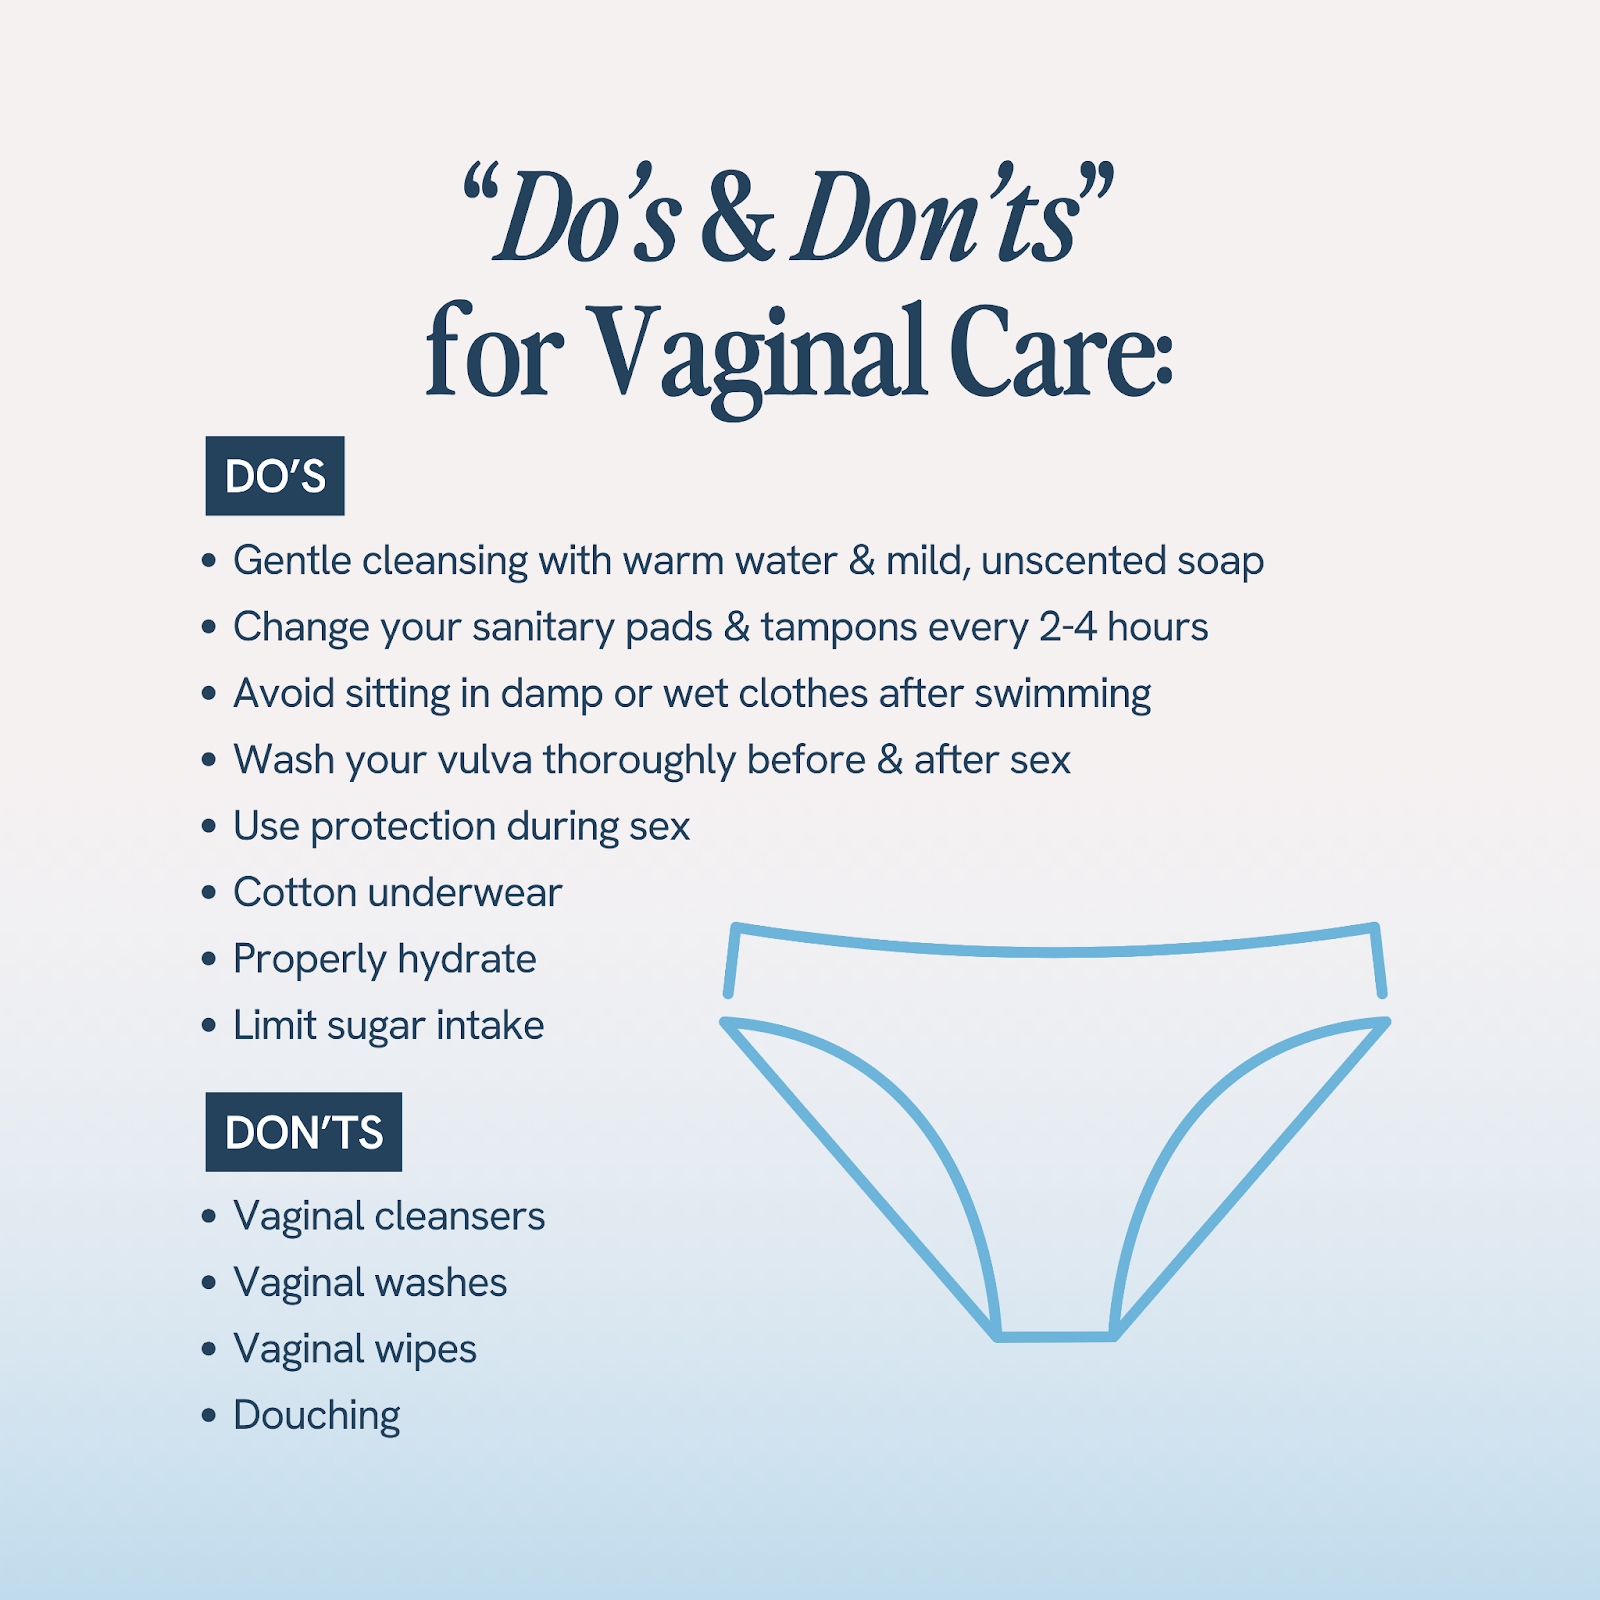 Health guide for vaginal care listing 'Do’s' like gentle cleansing and wearing cotton underwear, and 'Don’ts' advising against vaginal cleansers and douching, alongside an underwear graphic